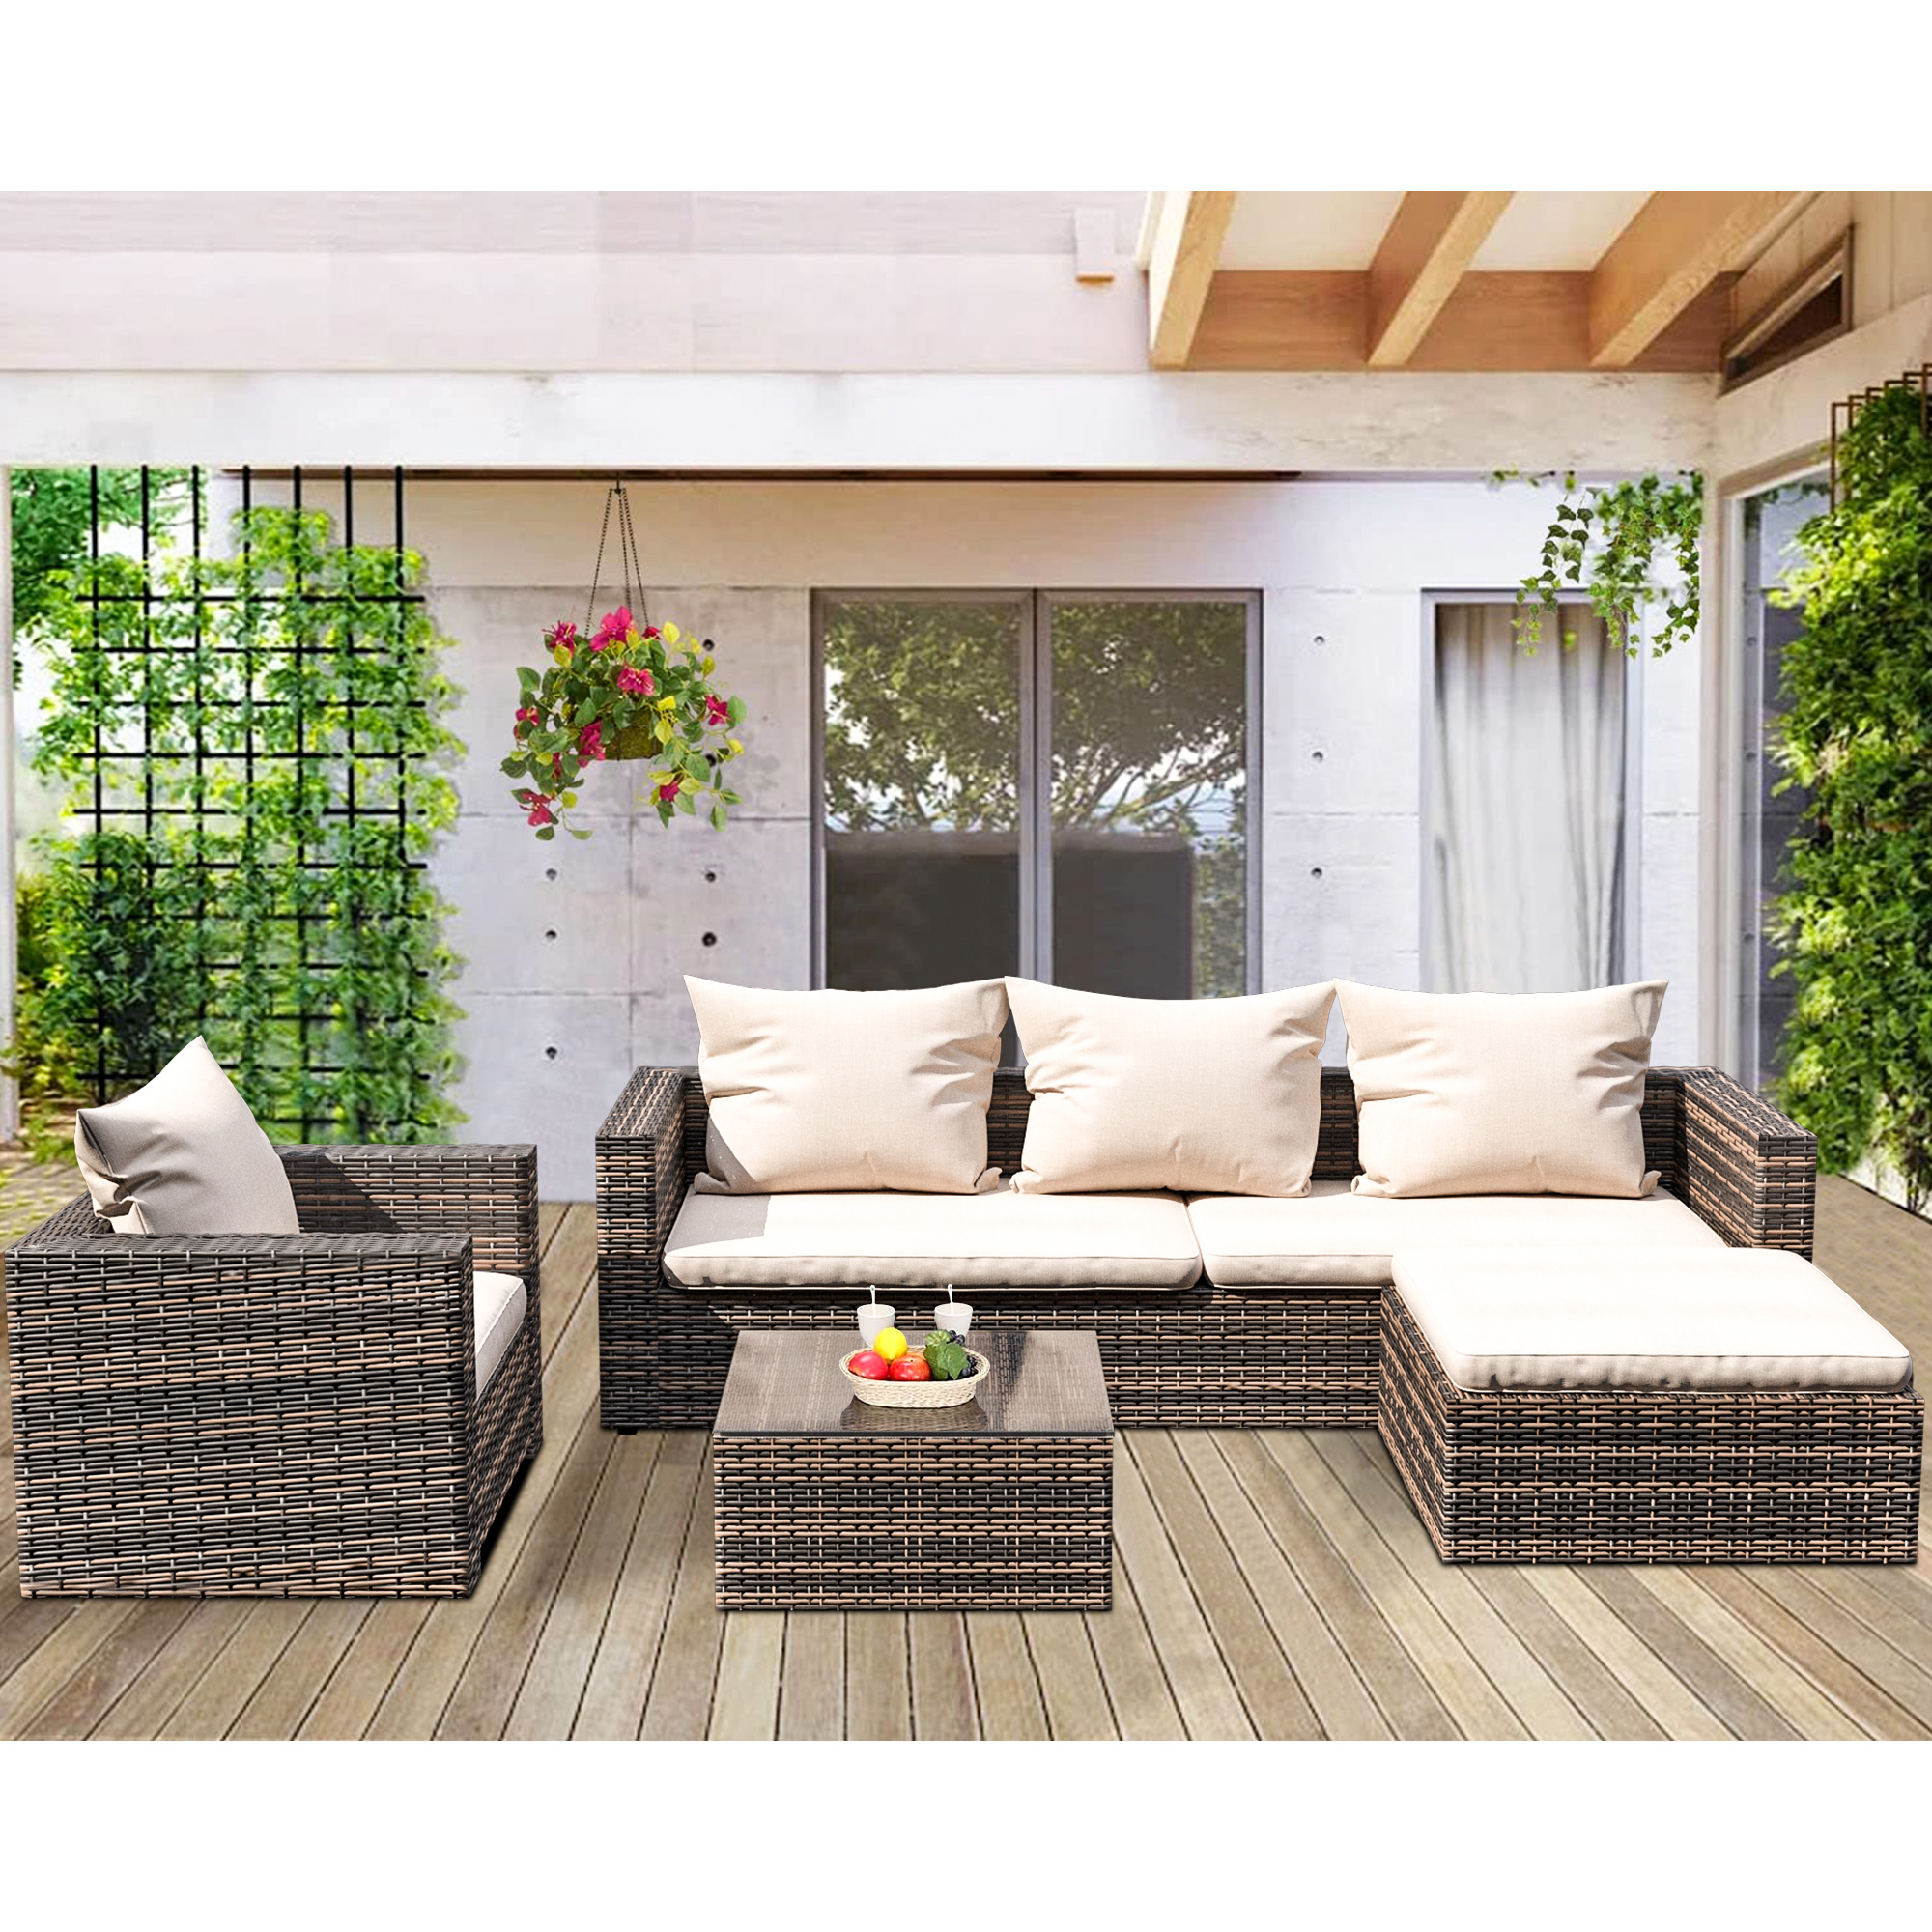 enyopro Rattan Patio Sofa Set, 4 Piece Outdoor Sectional Furniture Set, All-Weather PE Rattan Wicker Patio Conversation Set, Cushioned Sofa Set with Glass Table for Garden Pool Deck Porch, K2829 - image 2 of 10